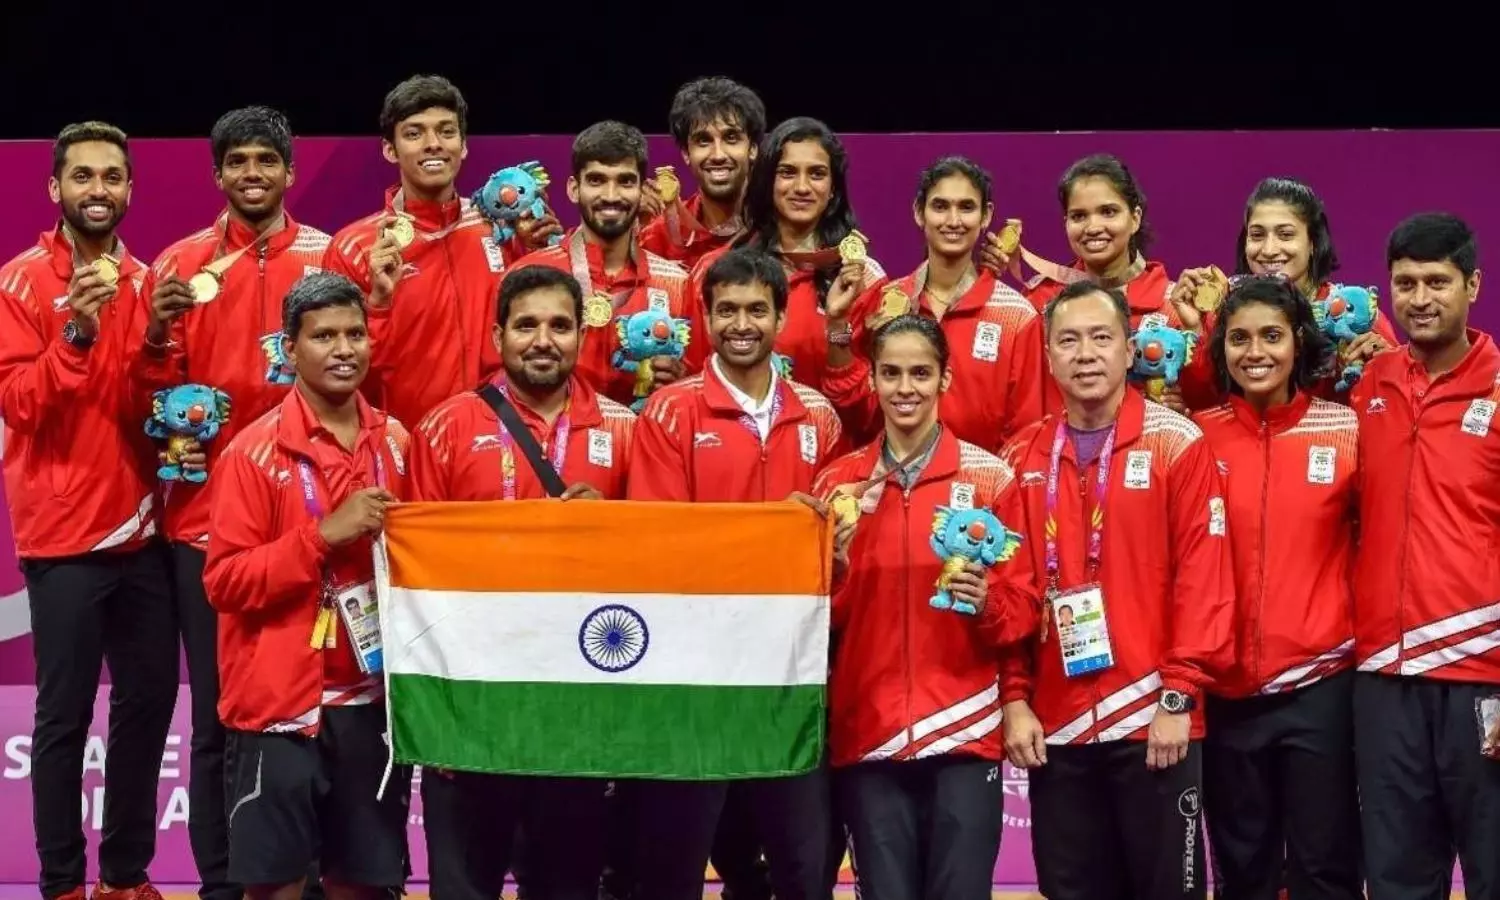 Commonwealth Games 2022 India to play Pakistan in Mixed Team event on Day 1